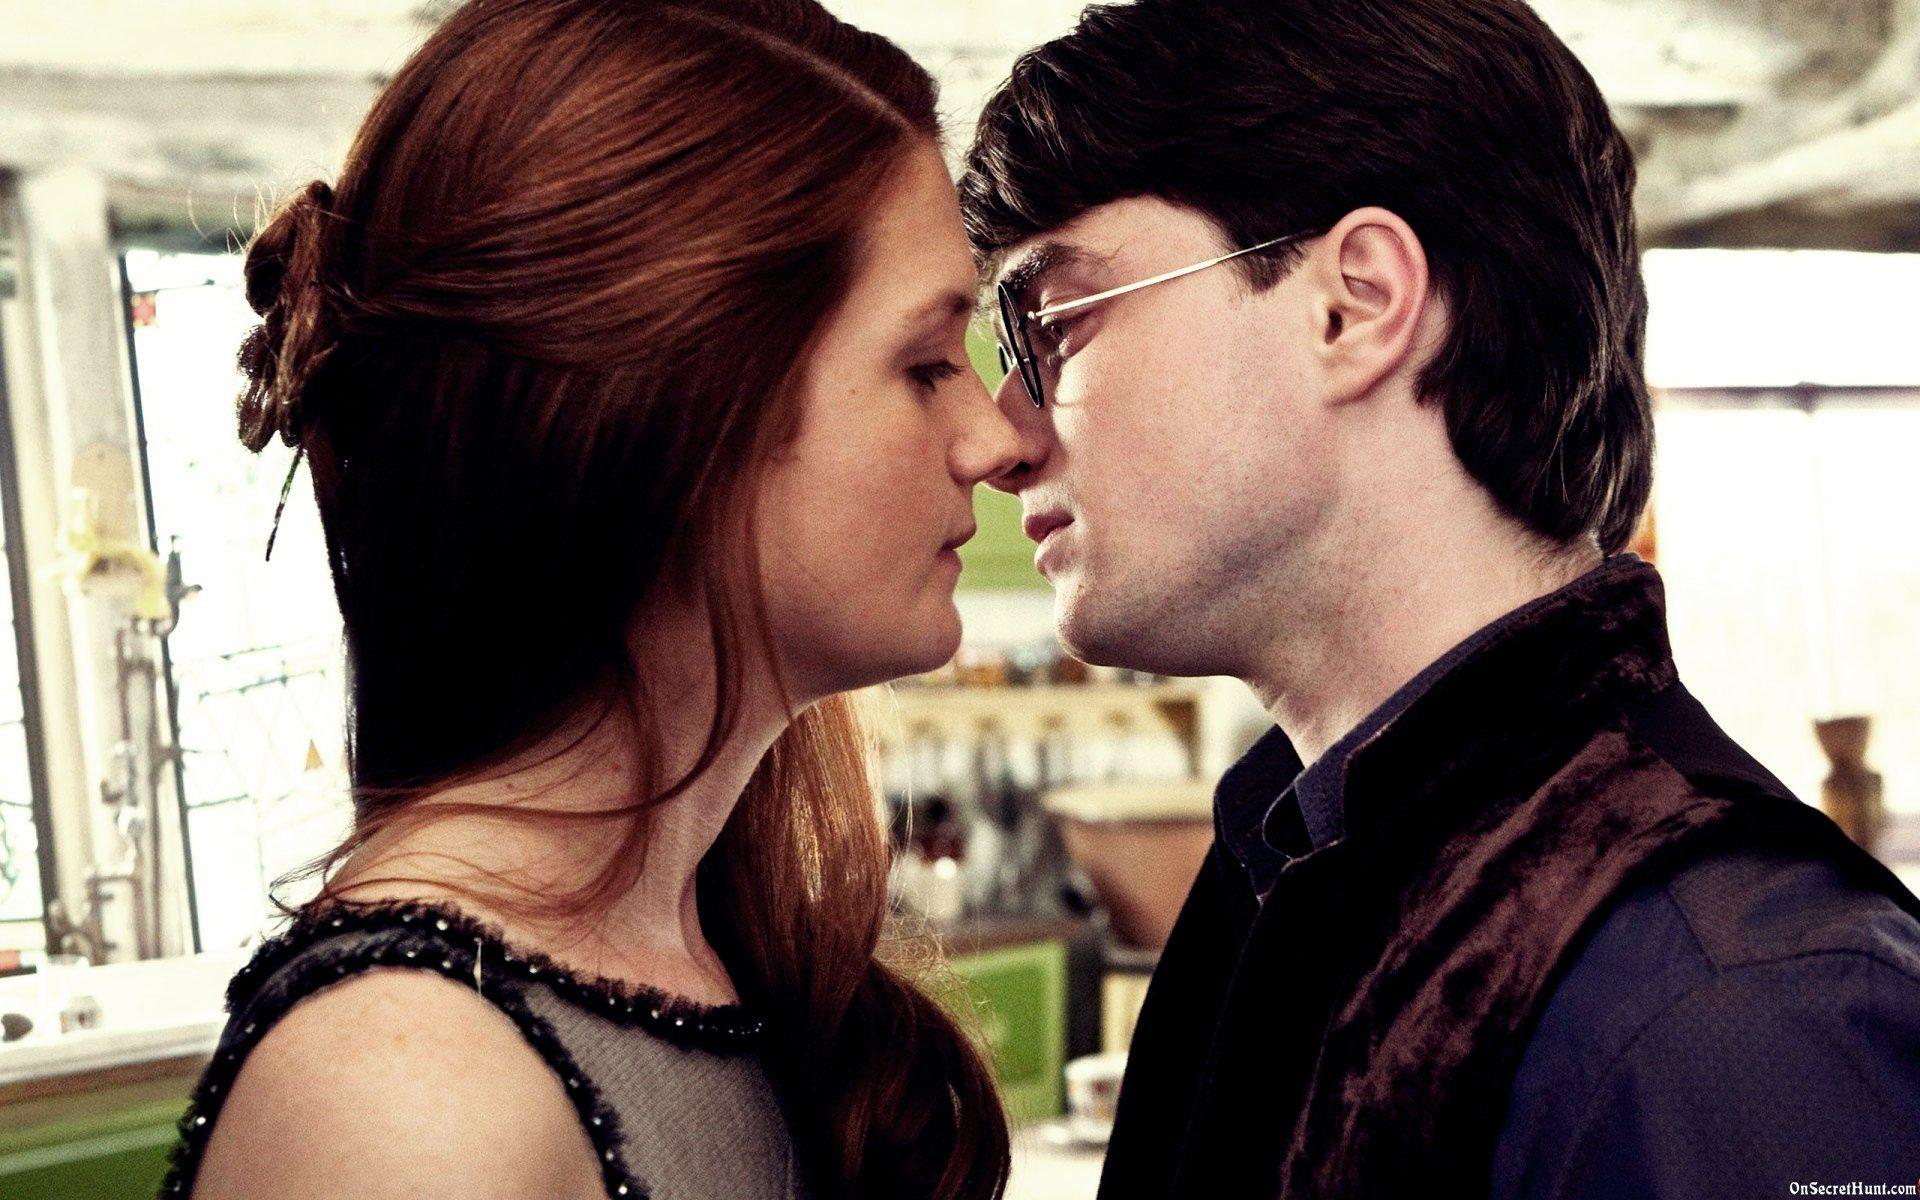 harry potter and ginny weasley. Harry Potter and Ginny Weasley Kissing Scene Deathly Hallows P. Harry potter ginny, Harry potter kiss, Harry potter ginny weasley